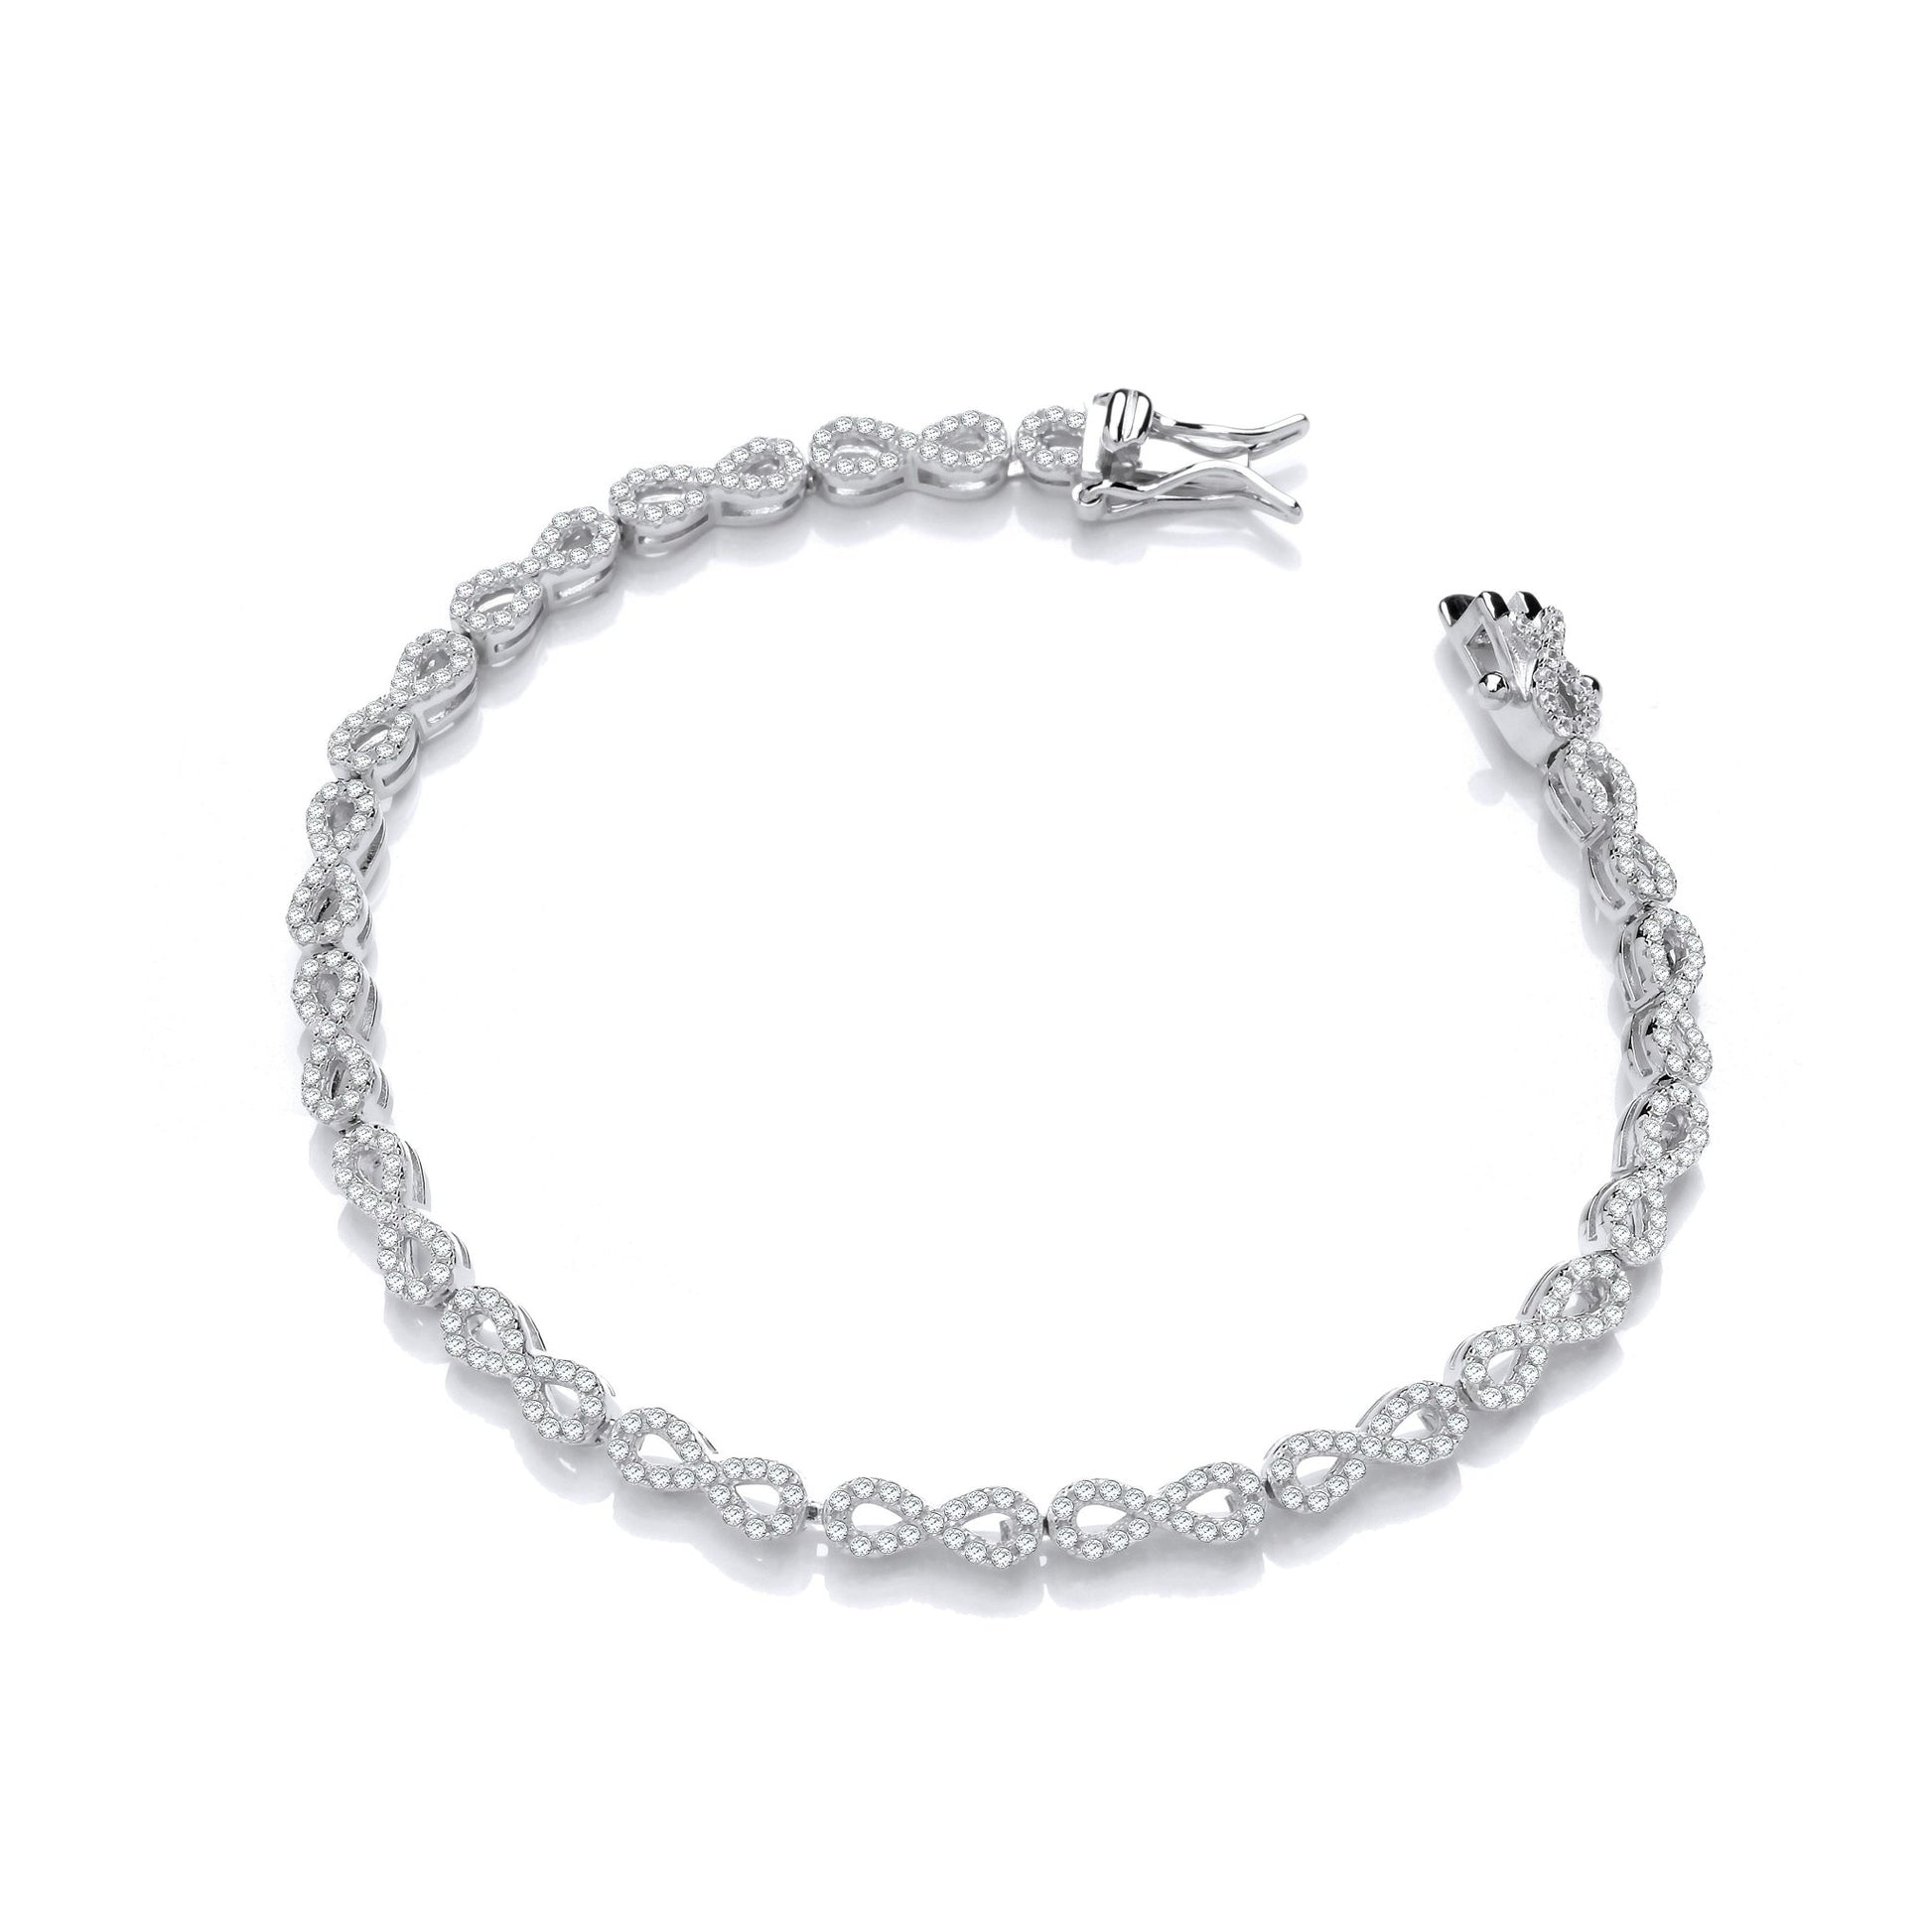 Tennis 925 Sterling Silver Bracelet - 7 Inches - FJewellery